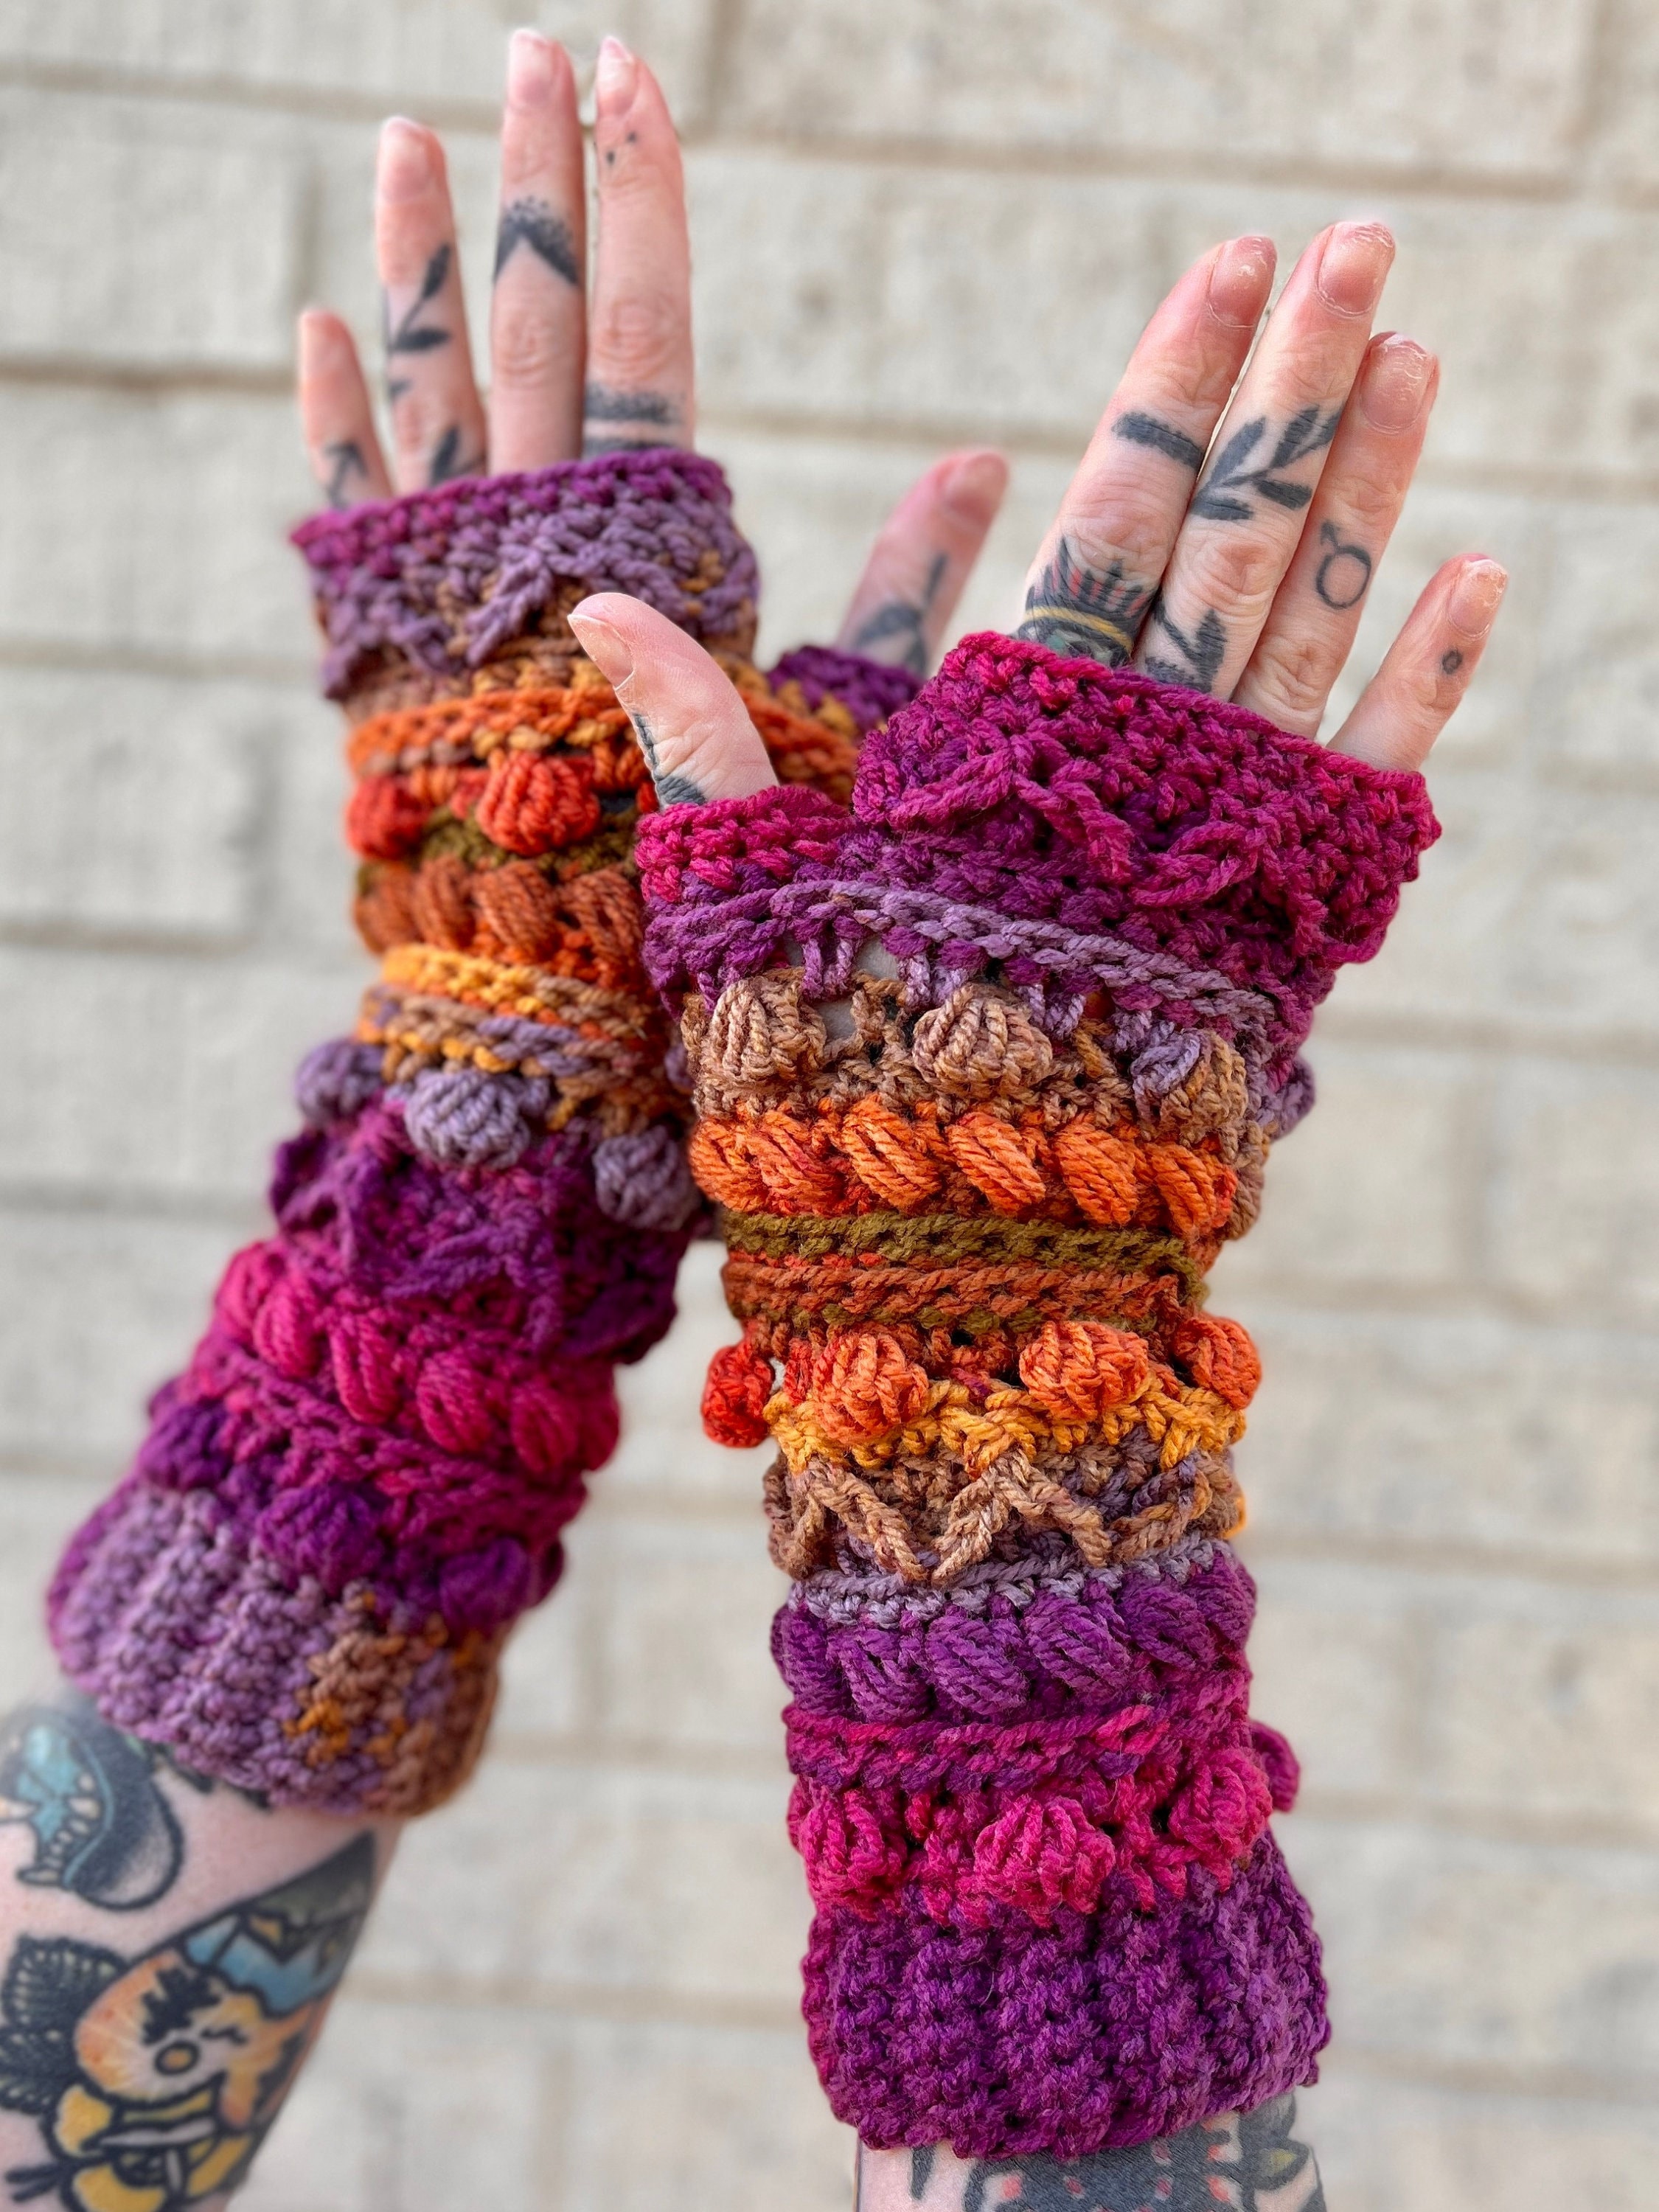 Fingerless Gloves Pattern, Knitting Gloves, Mittens With Thumb, Open Finger  Gloves, Row by Row Knitting Tutorial, Instant Download 6001 